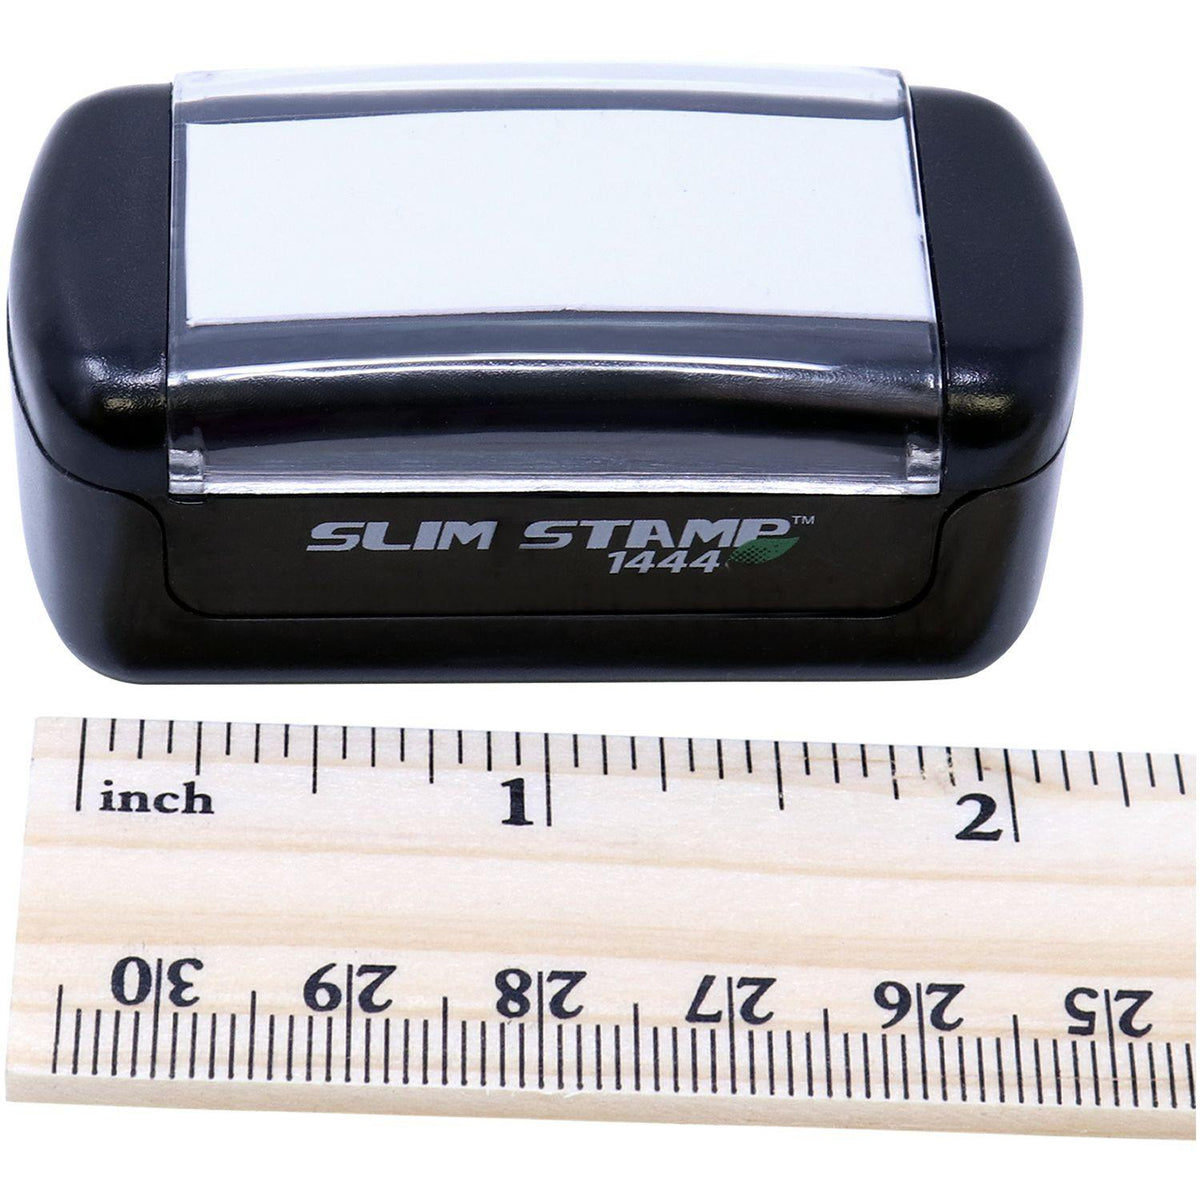 Measurement Slim Pre-Inked Standard Mail Stacked Stamp with Ruler